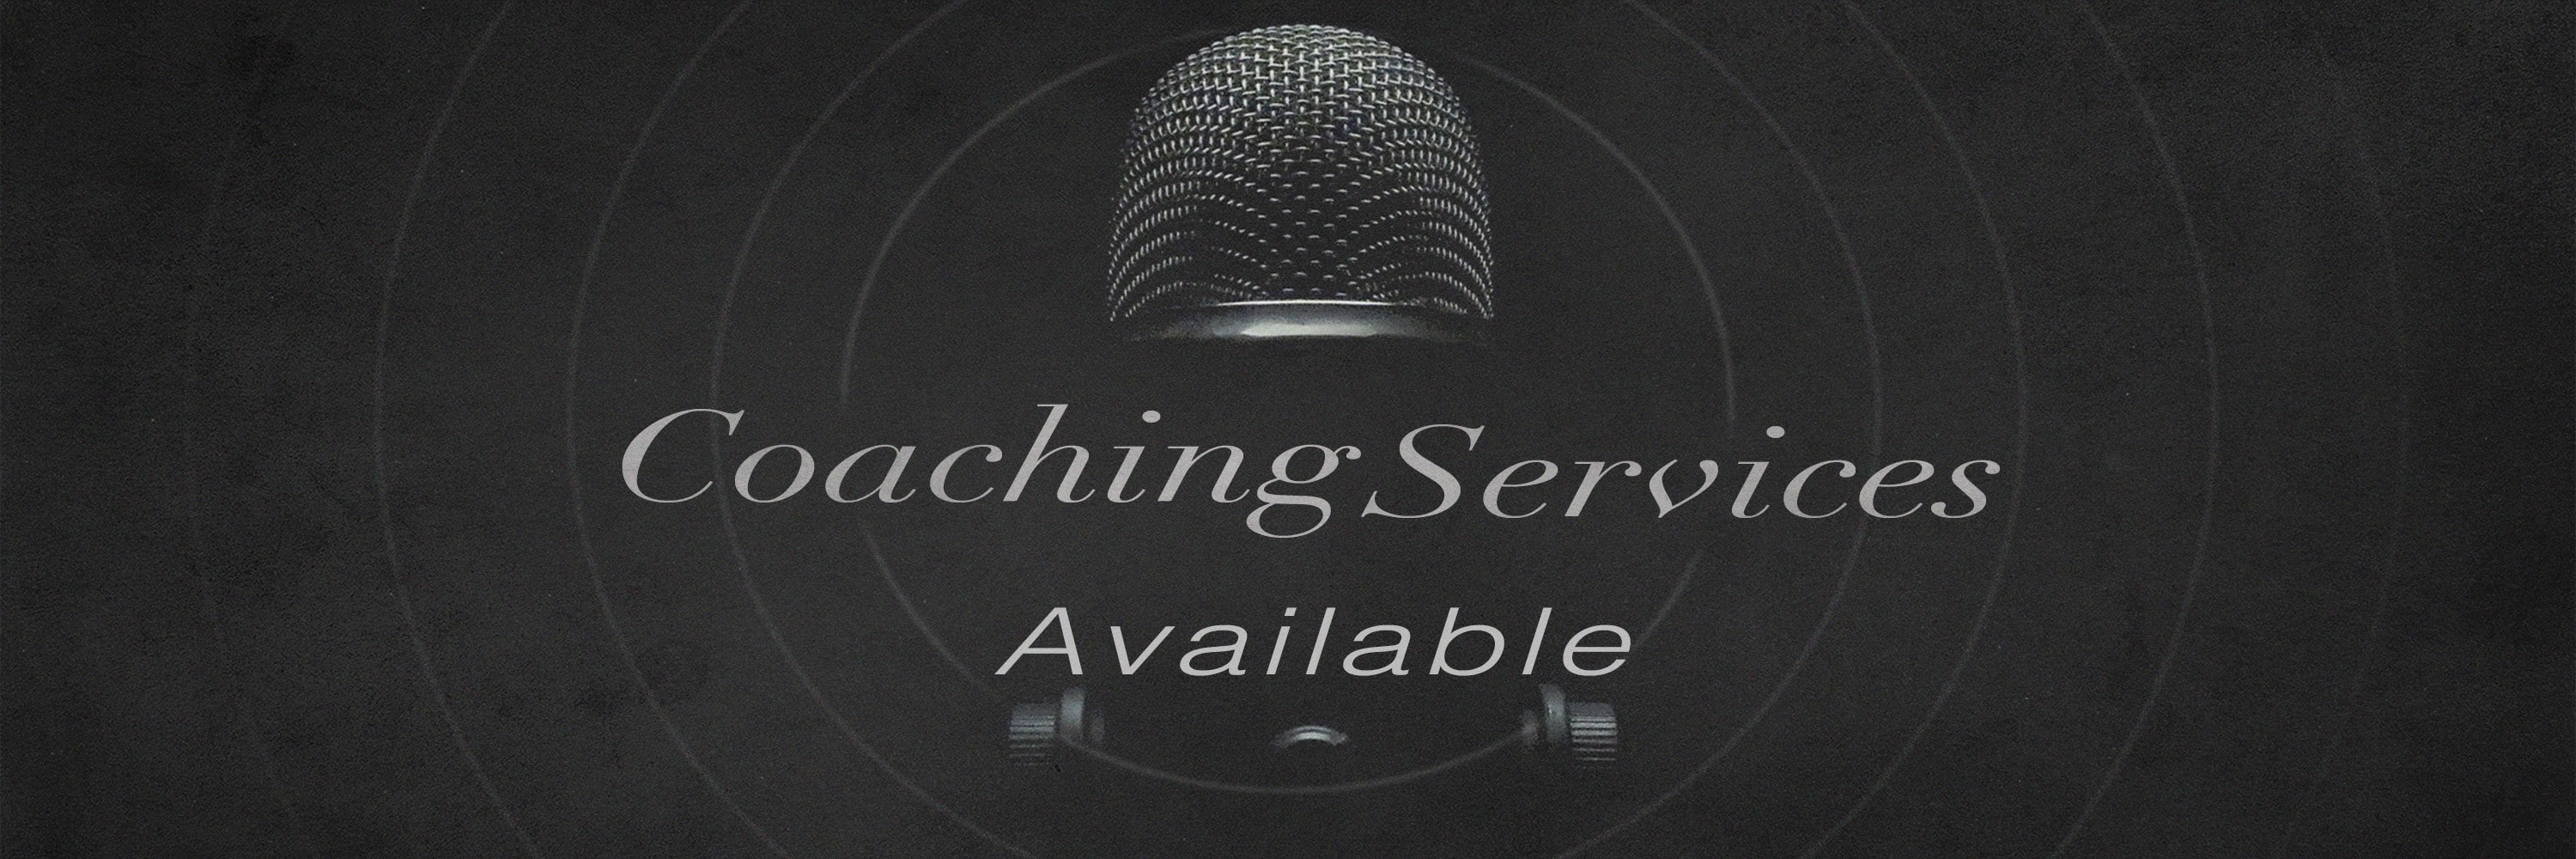 Coaching Services Available